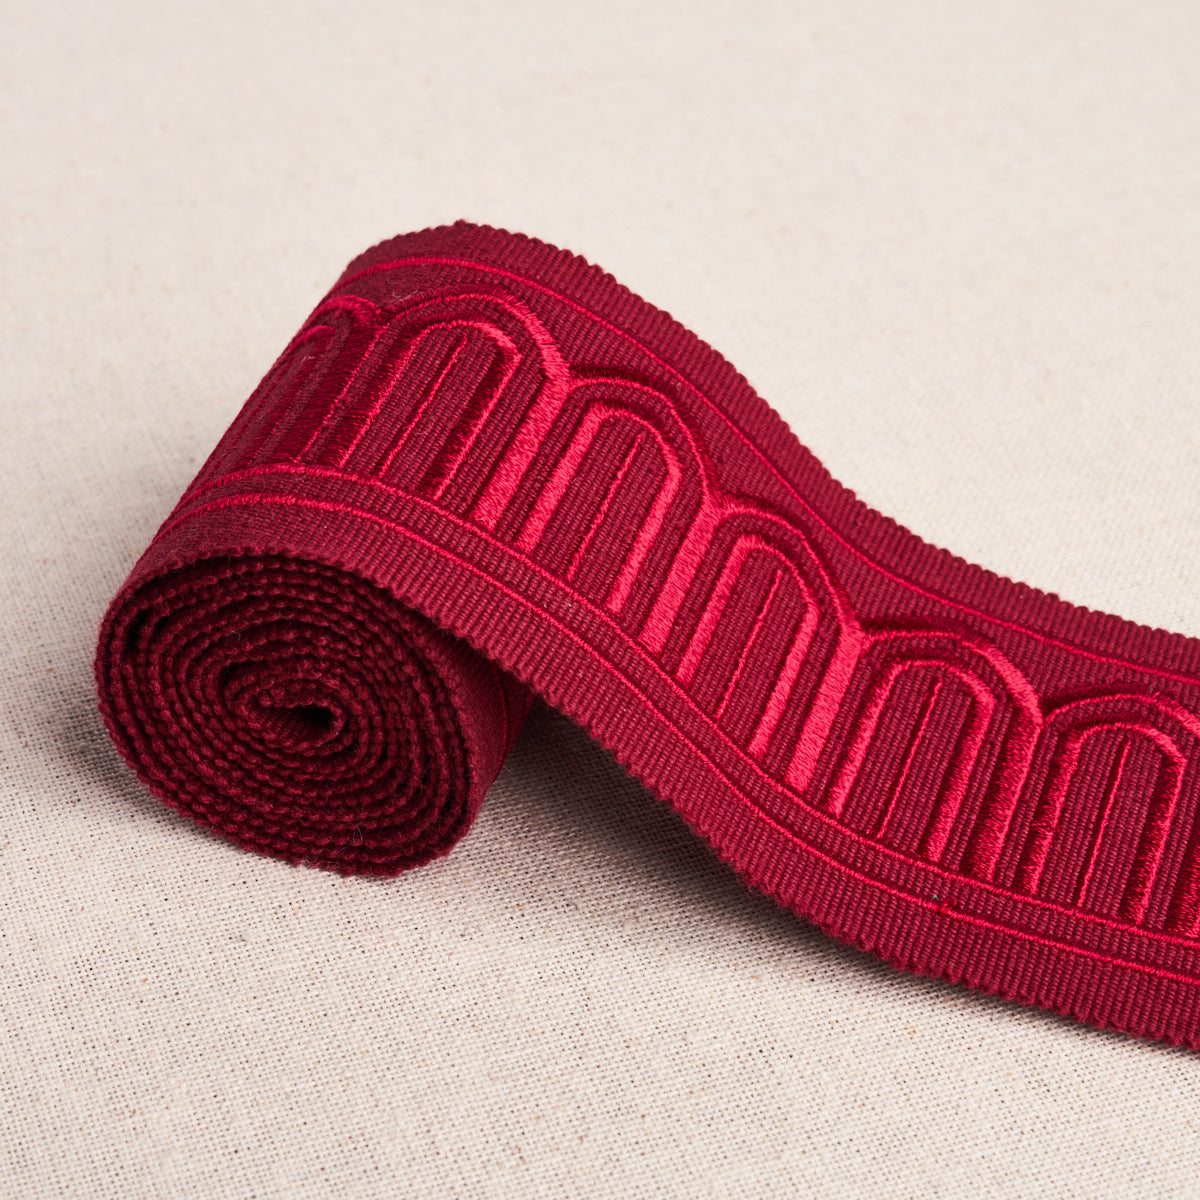 ARCHES EMBROIDERED TAPE MEDIUM | RED